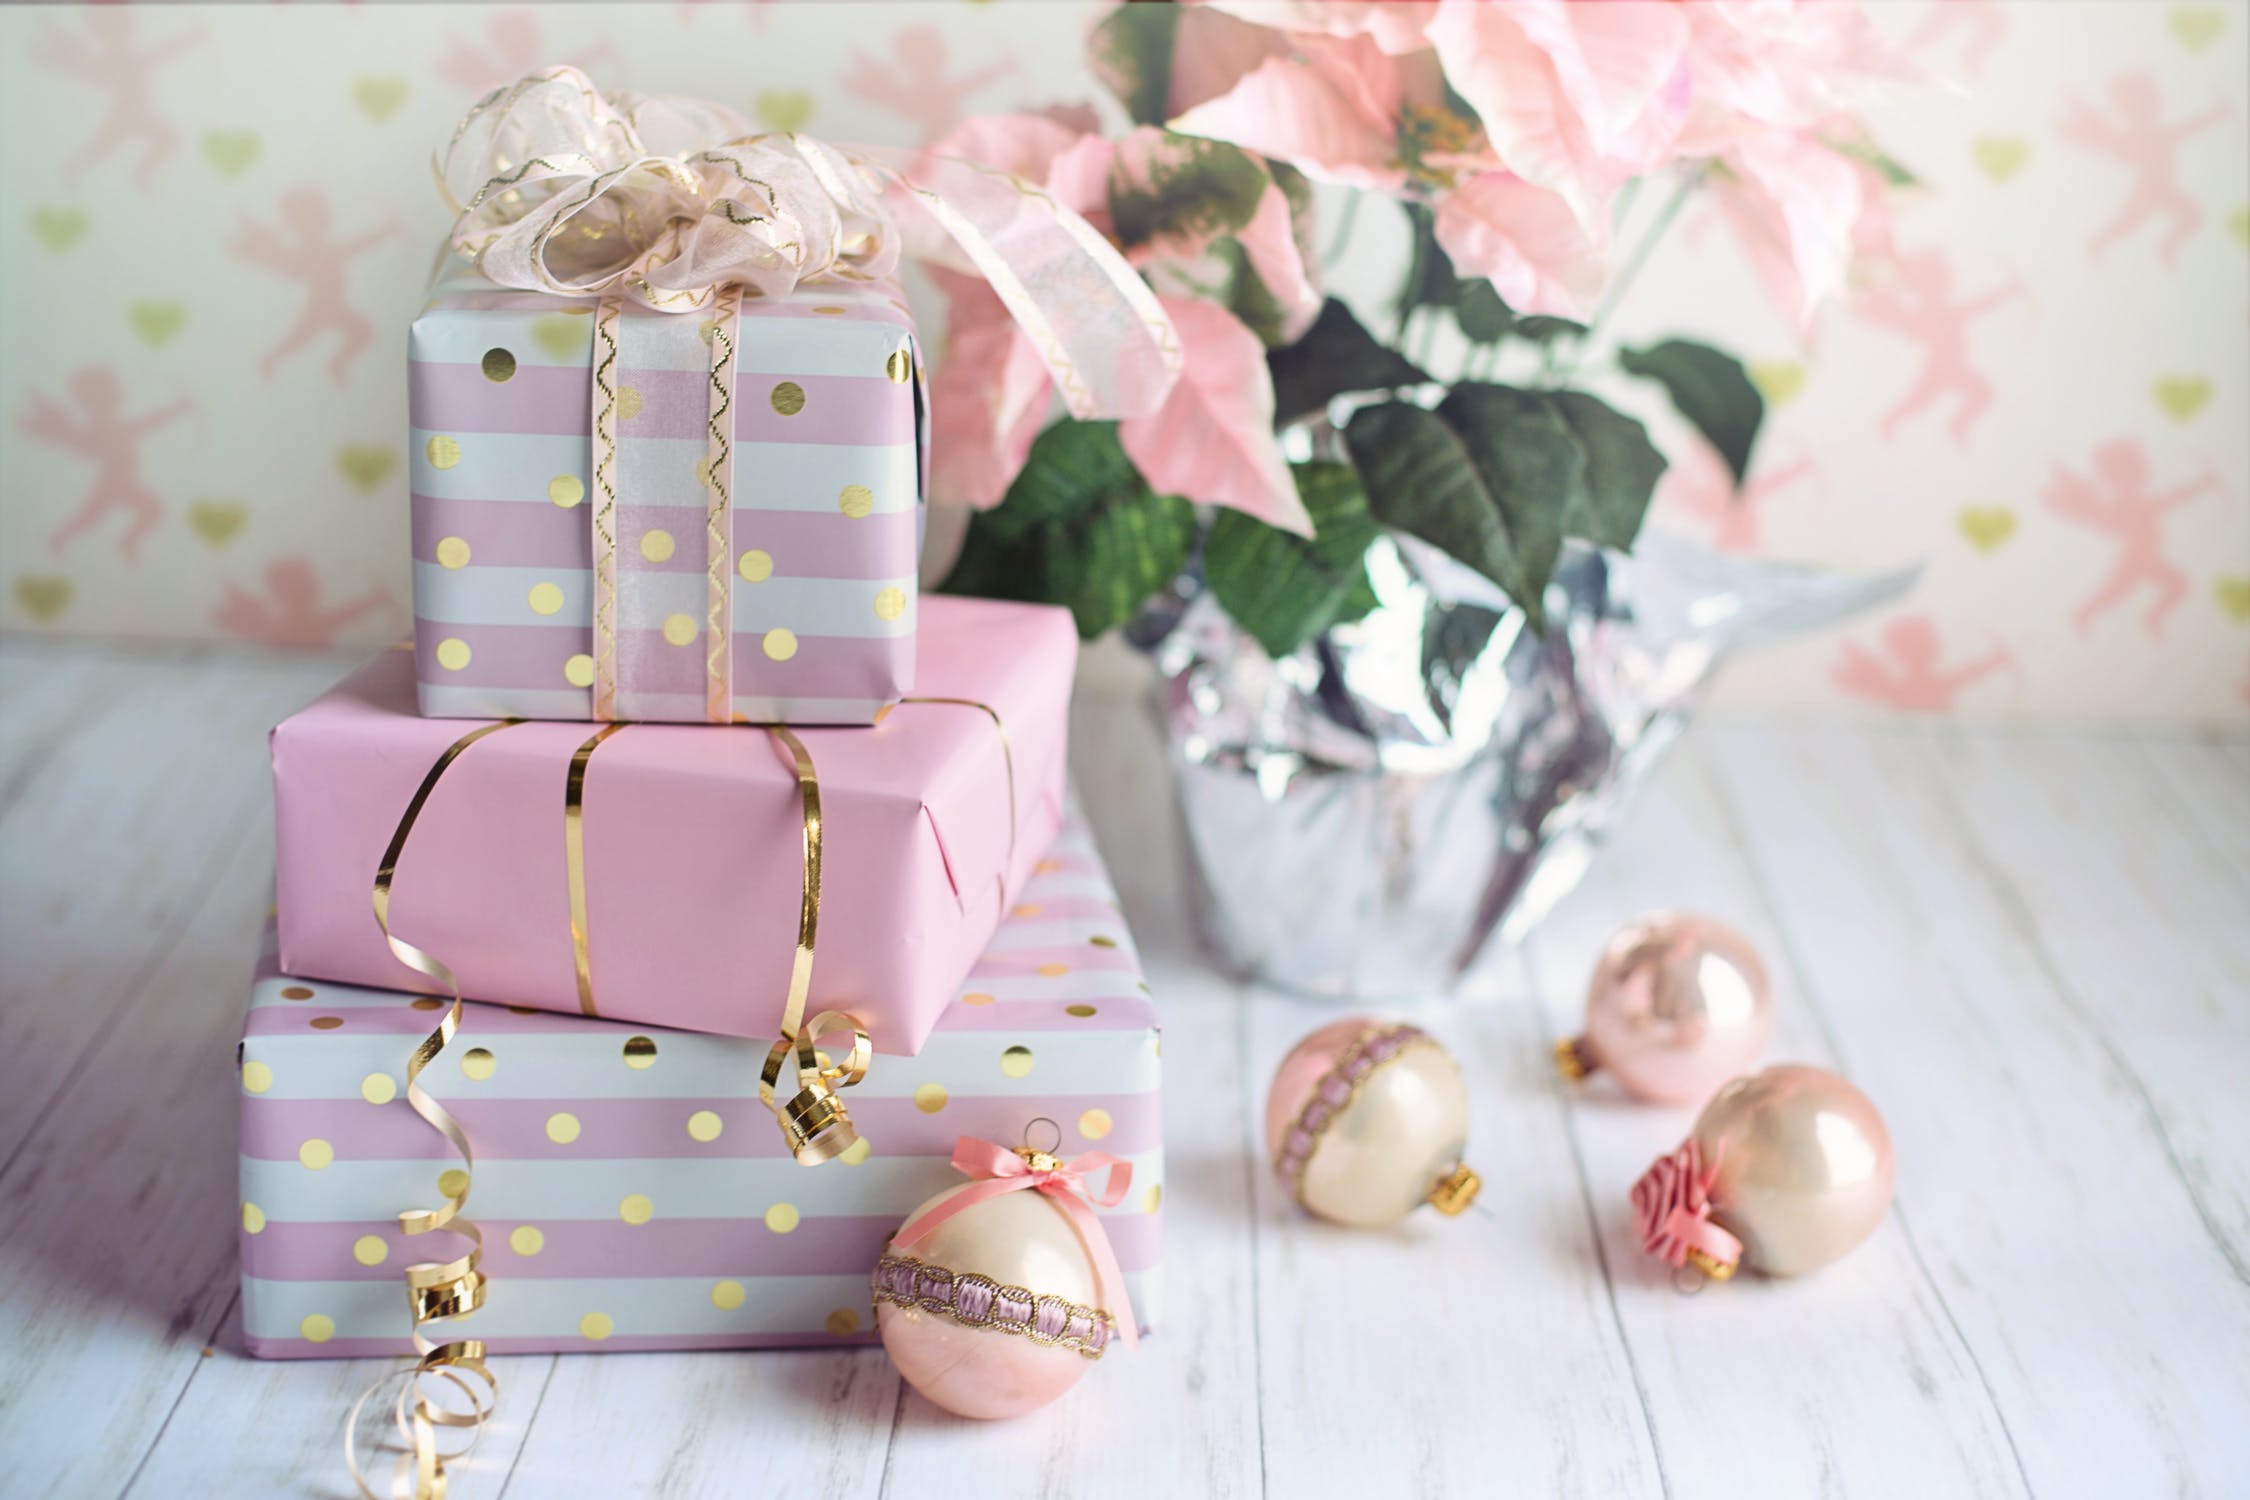 Things To Consider Before Buying Personalized Gifts